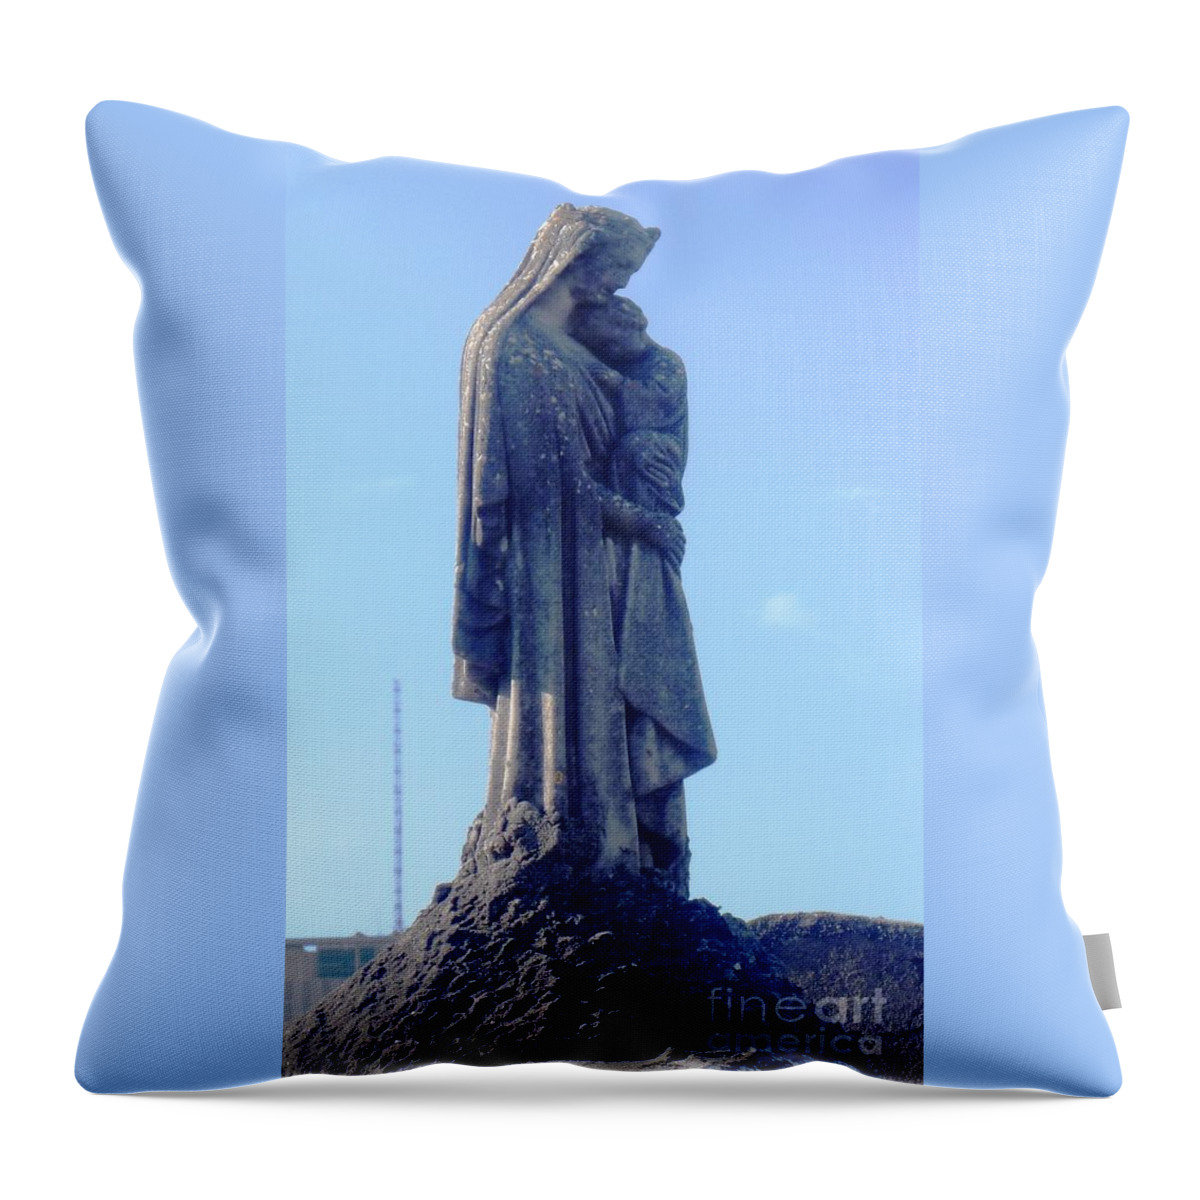 St. Loius Cemetery 1 In New Orleans La Throw Pillow featuring the photograph A Mother's Love by Alys Caviness-Gober